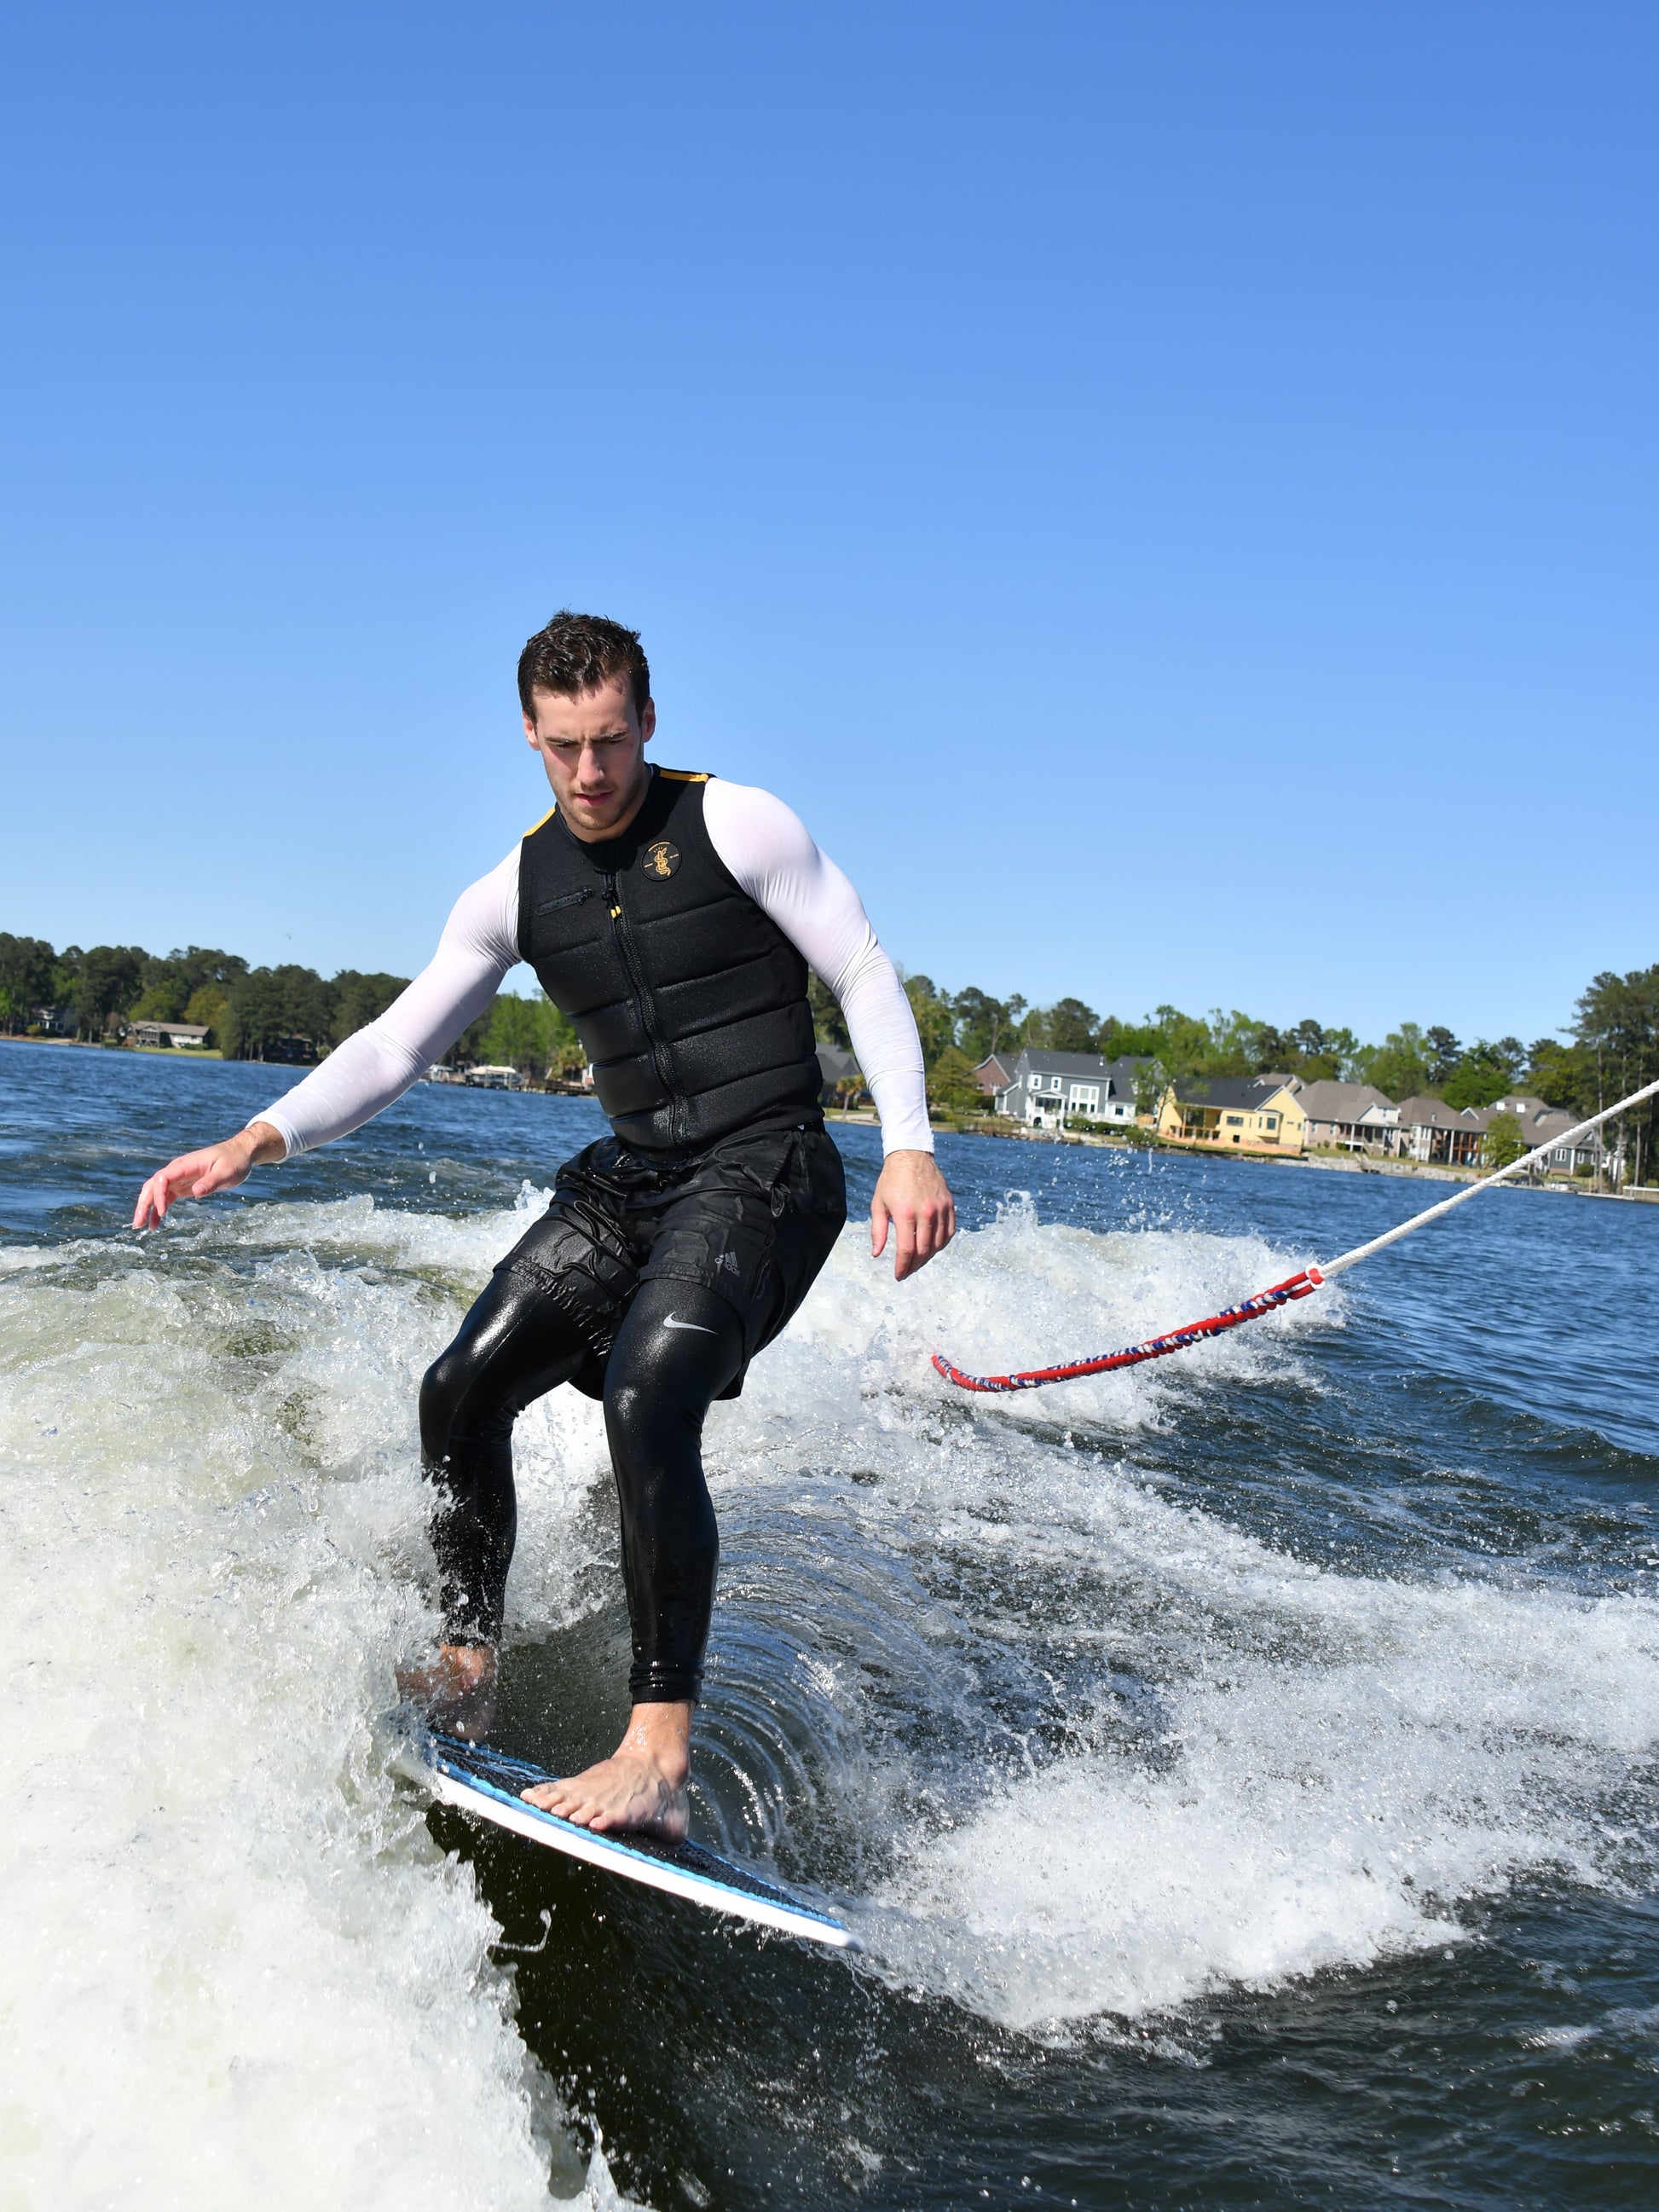 A man wake surfing on a wave behind a watersports boat